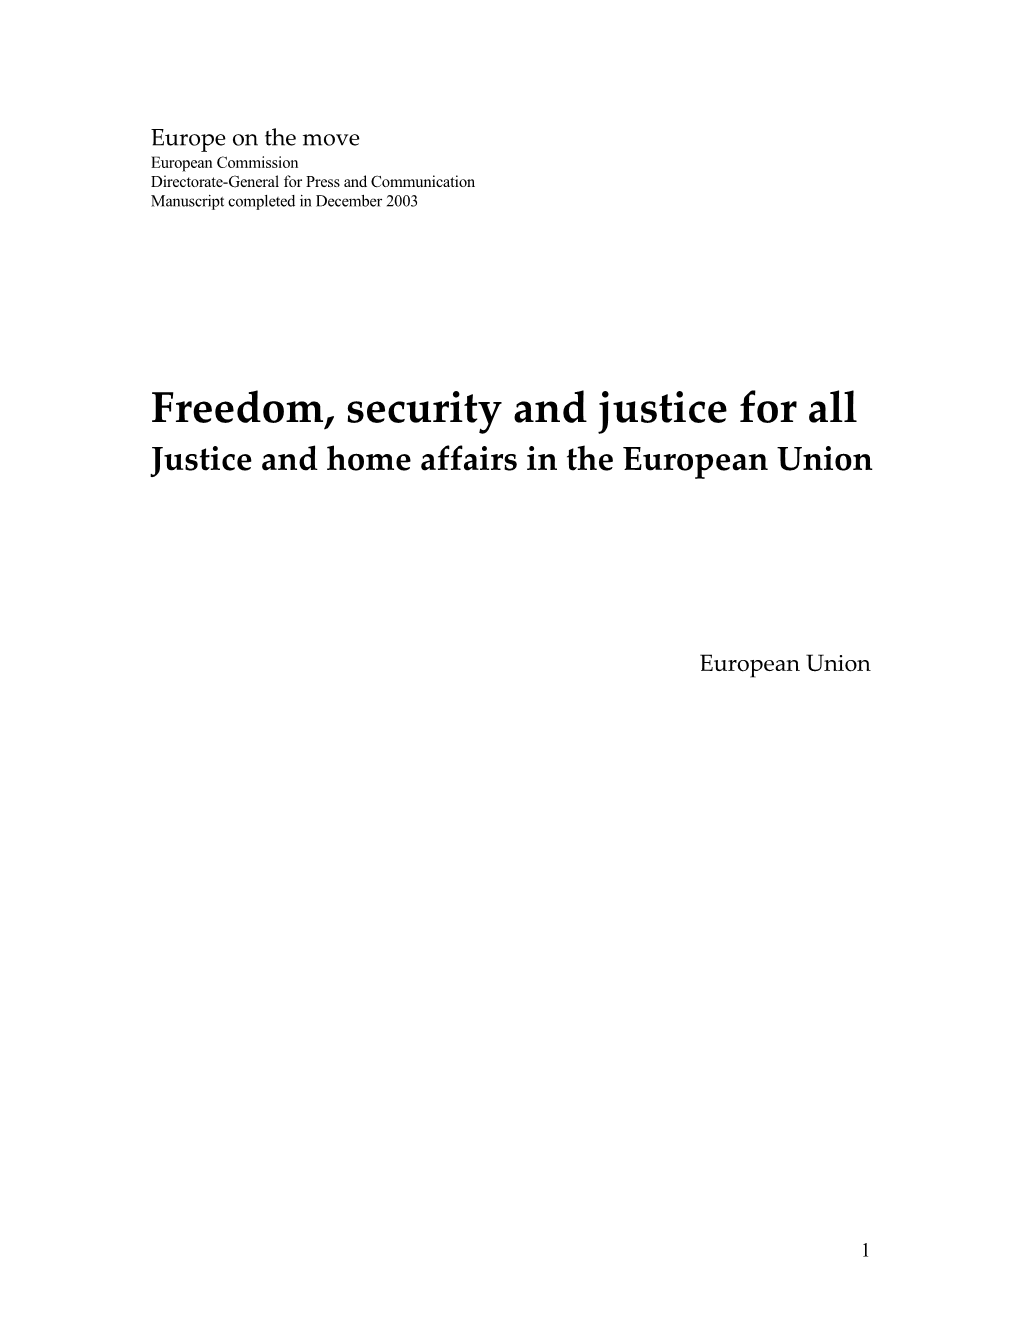 Freedom, Security and Justice for All - Justice and Home Affairs in the European Union